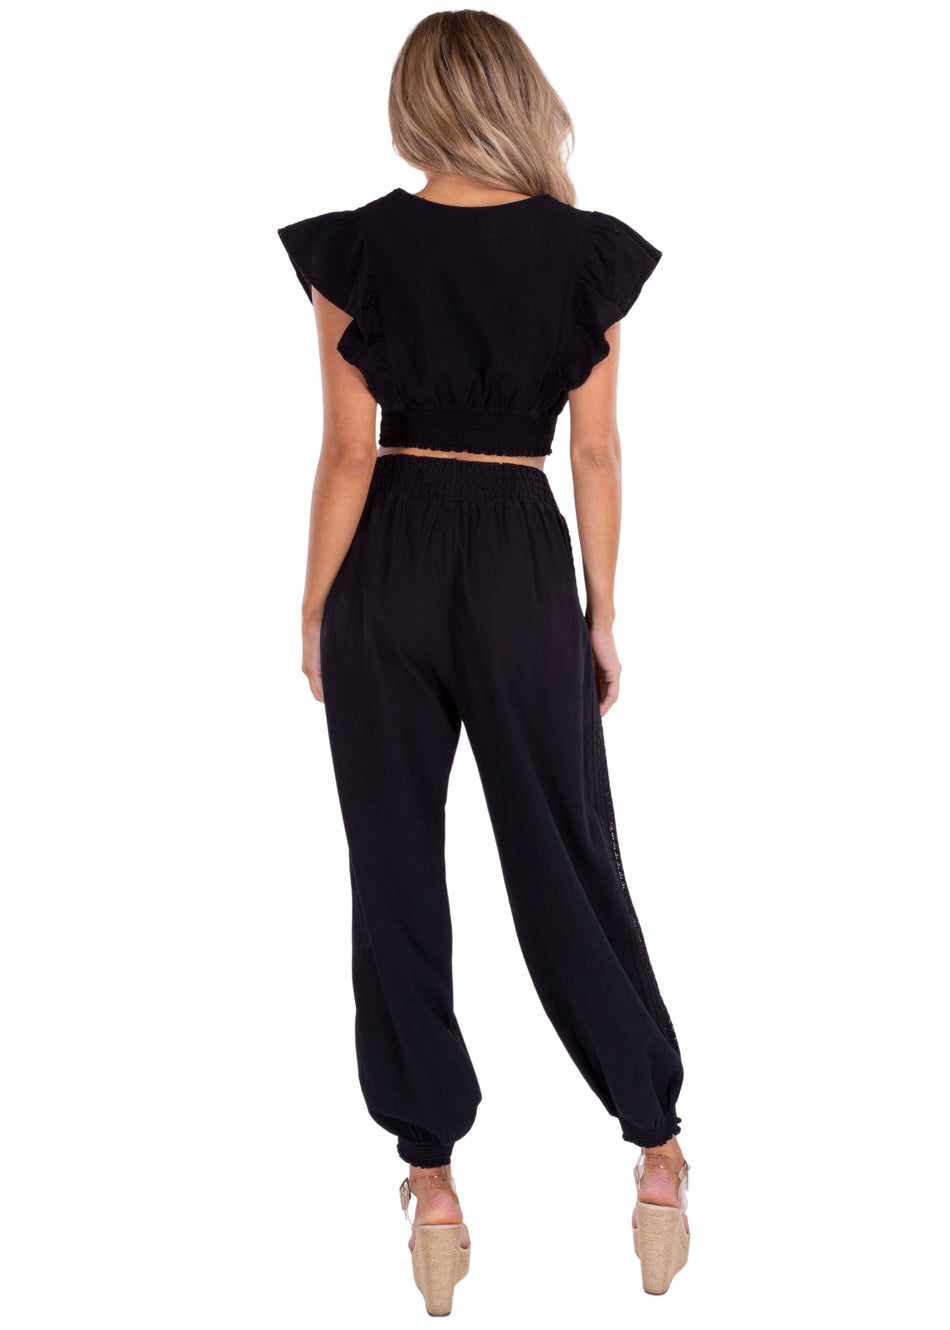 NW1410 - Black Cotton Top